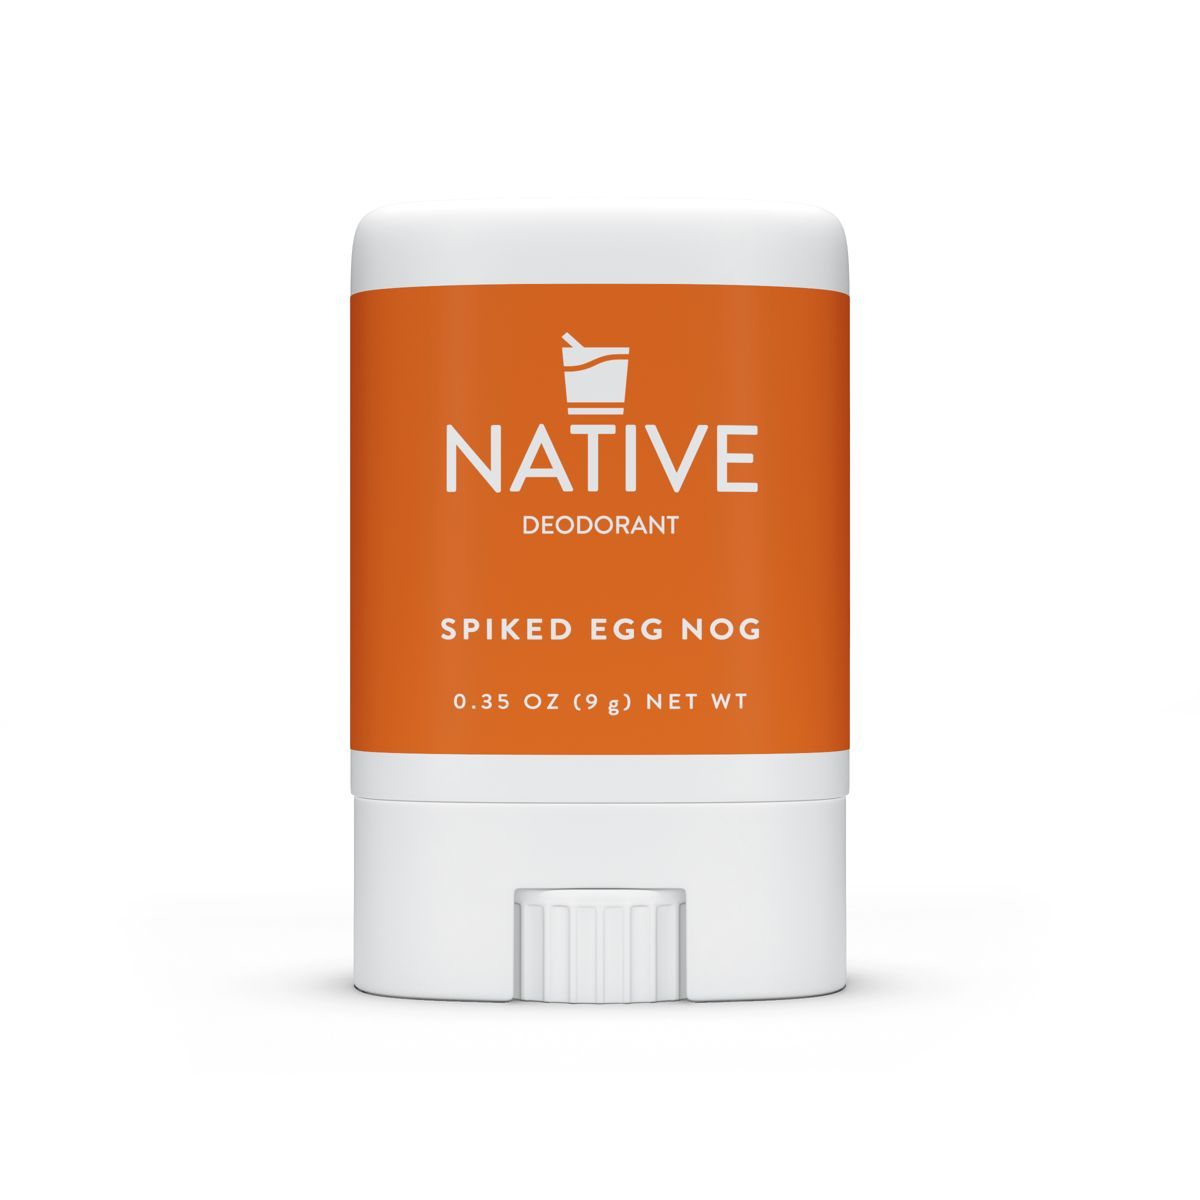 Native Deodorant - Limited Edition Holiday - Spiked Egg Nog - Aluminum Free - Trial Size 0.35 oz | Target